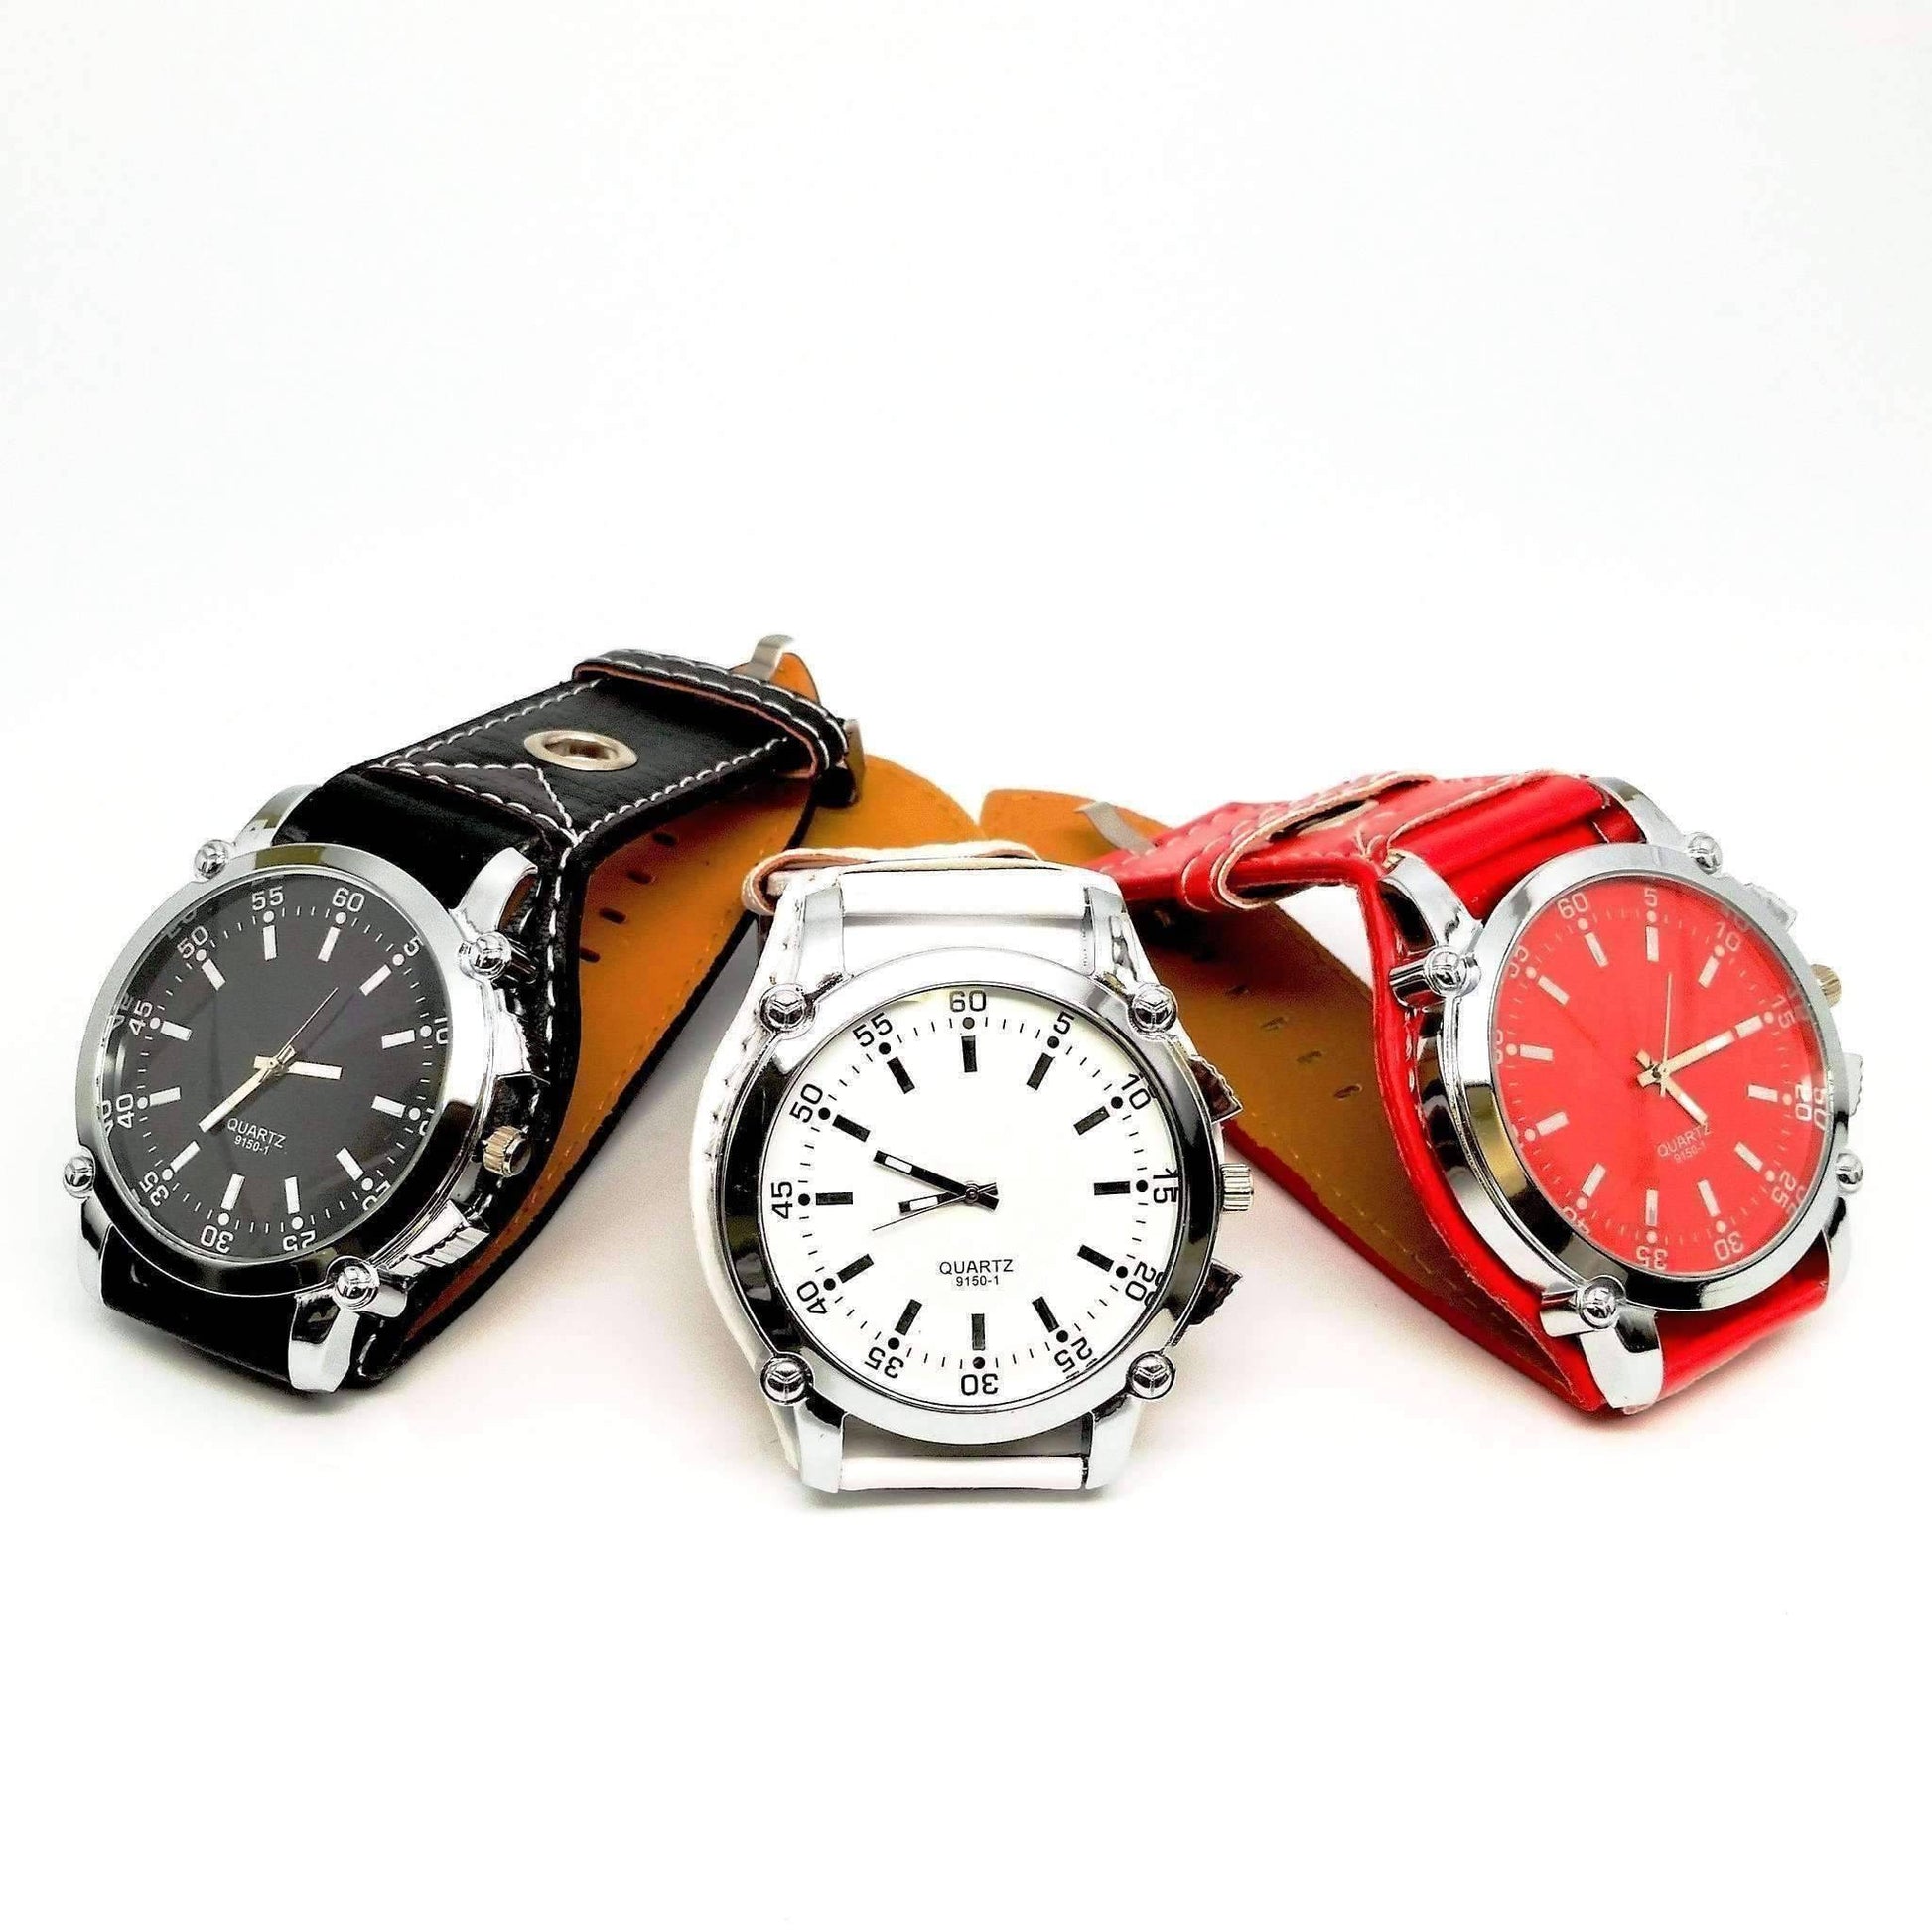 Feshionn IOBI Watches "Big Time" Over-sized Wrist Watch with Wide Leather Band - 3 Colors to Choose